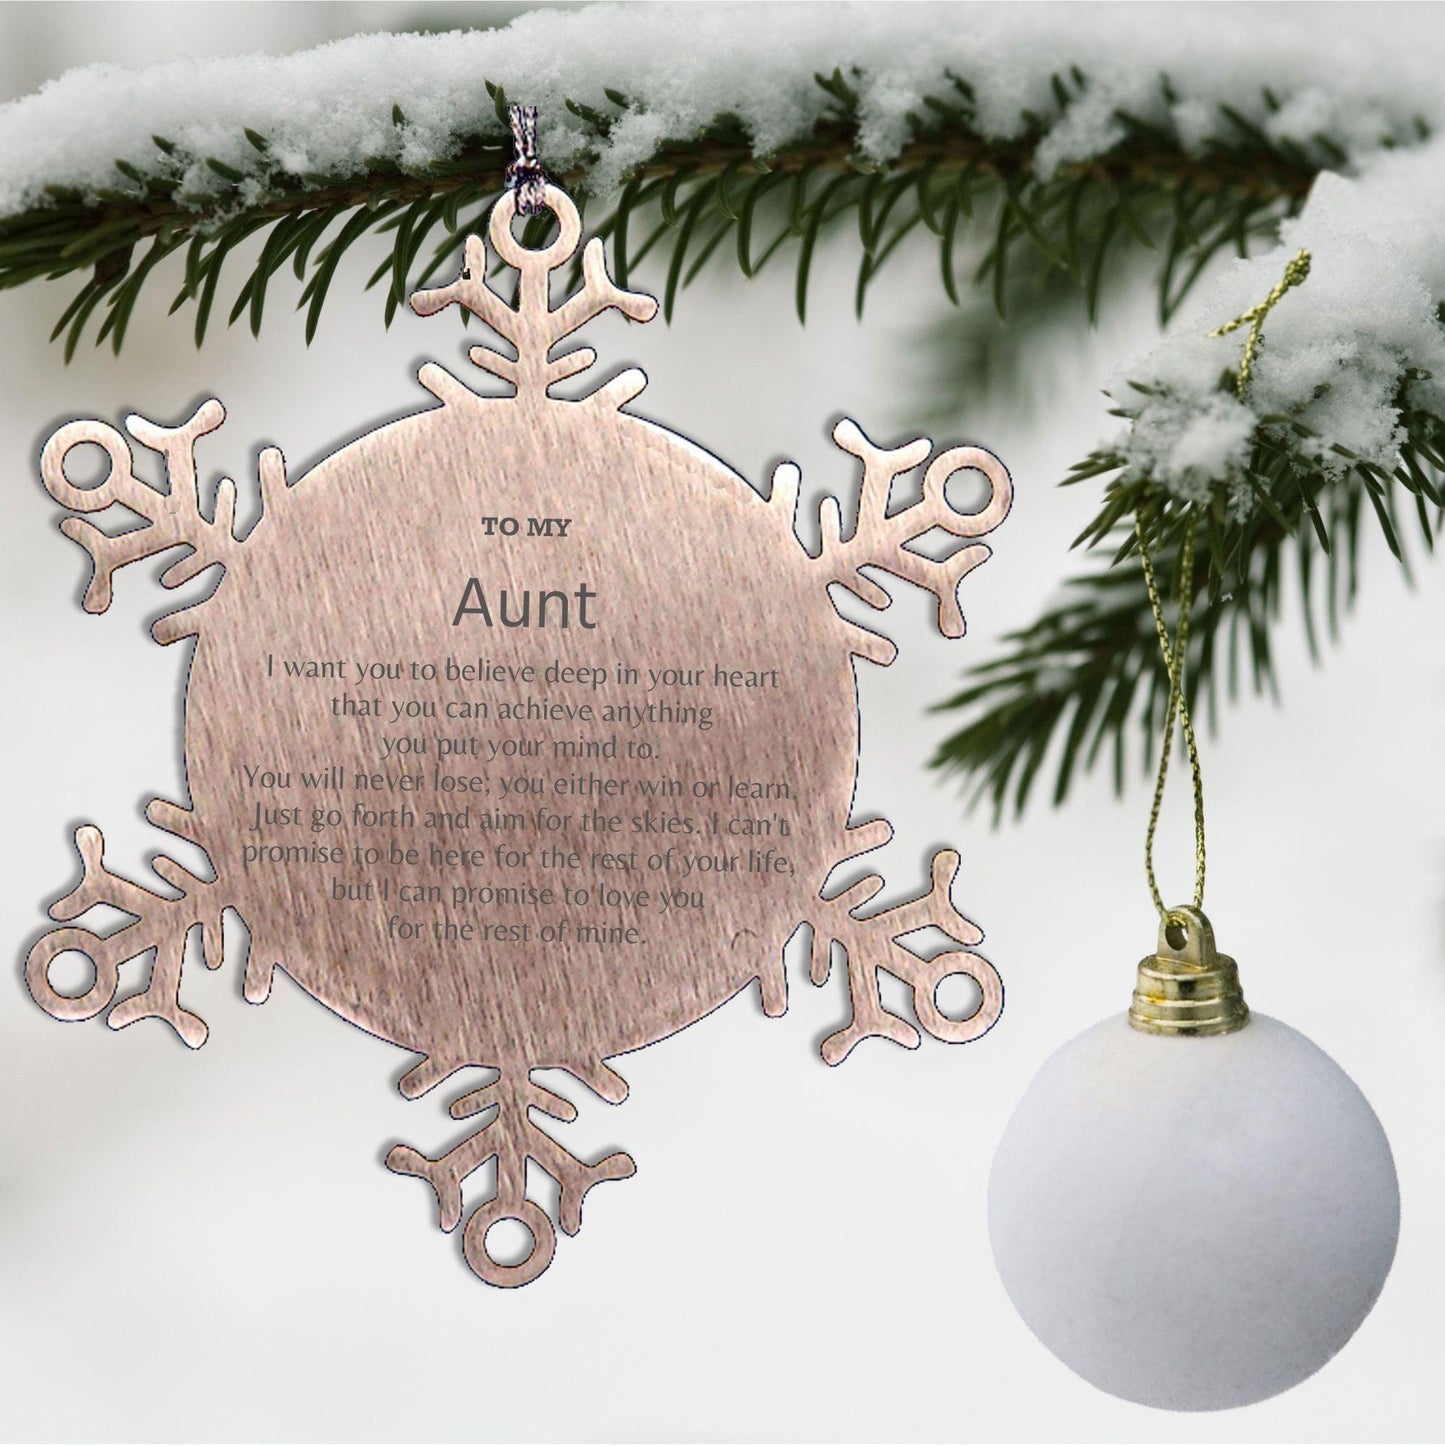 Motivational Aunt Snowflake Christmas Ornament I can promise to love you for the rest of mine Birthday Gifts - Mallard Moon Gift Shop